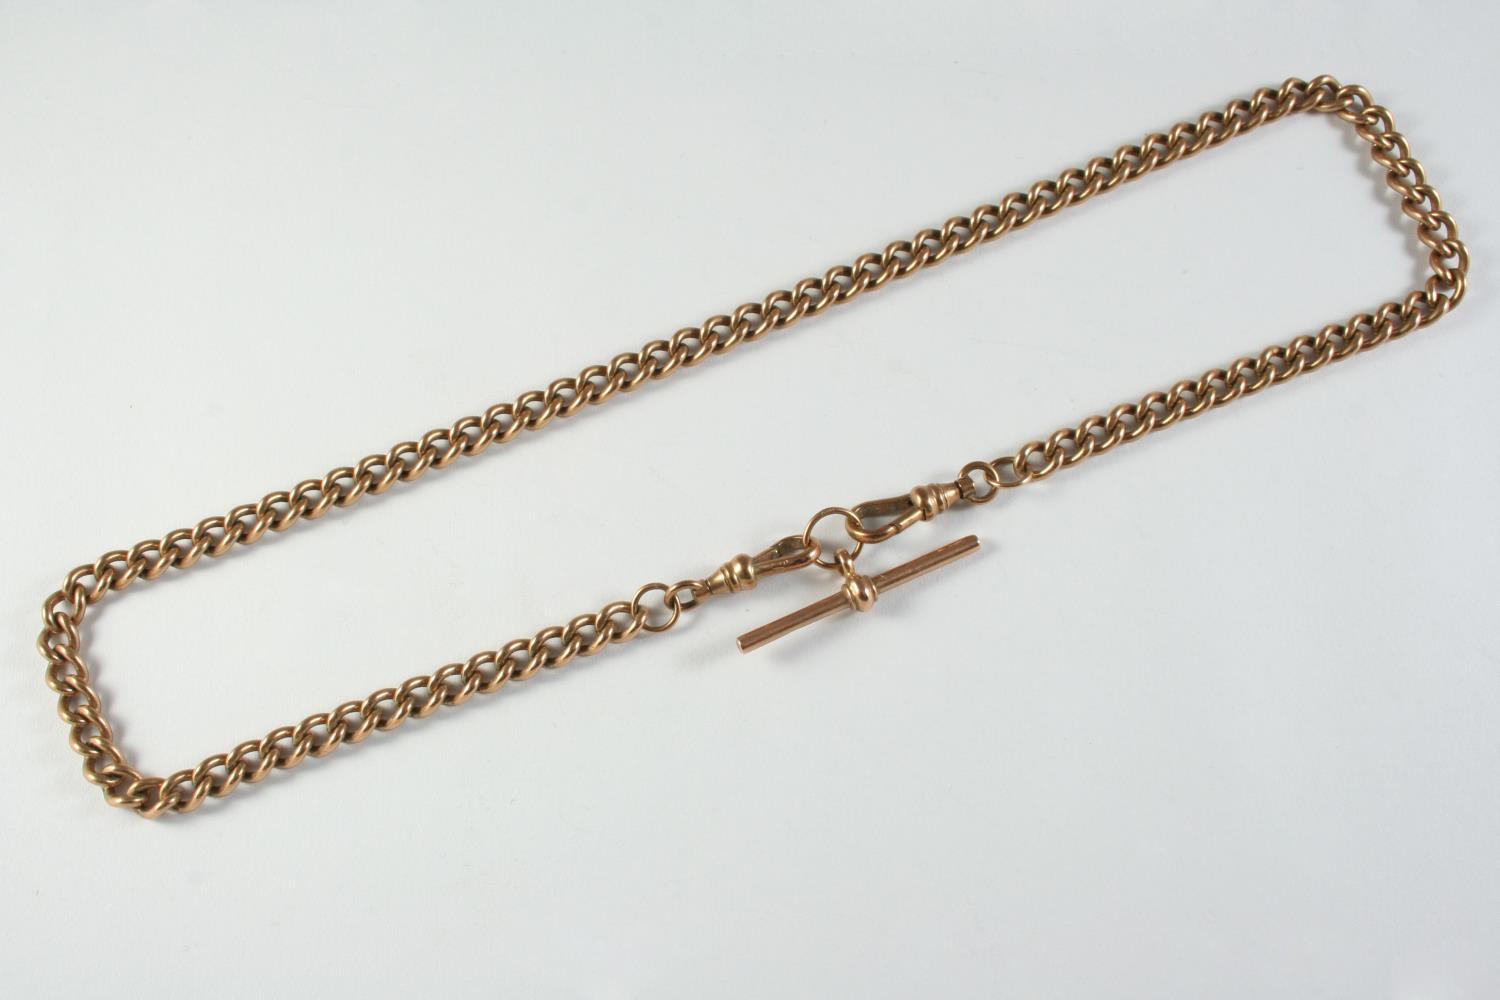 A 9CT GOLD CURB LINK WATCH CHAIN suspending a 9ct gold 't' bar, 45.5cm long, 39.6 grams